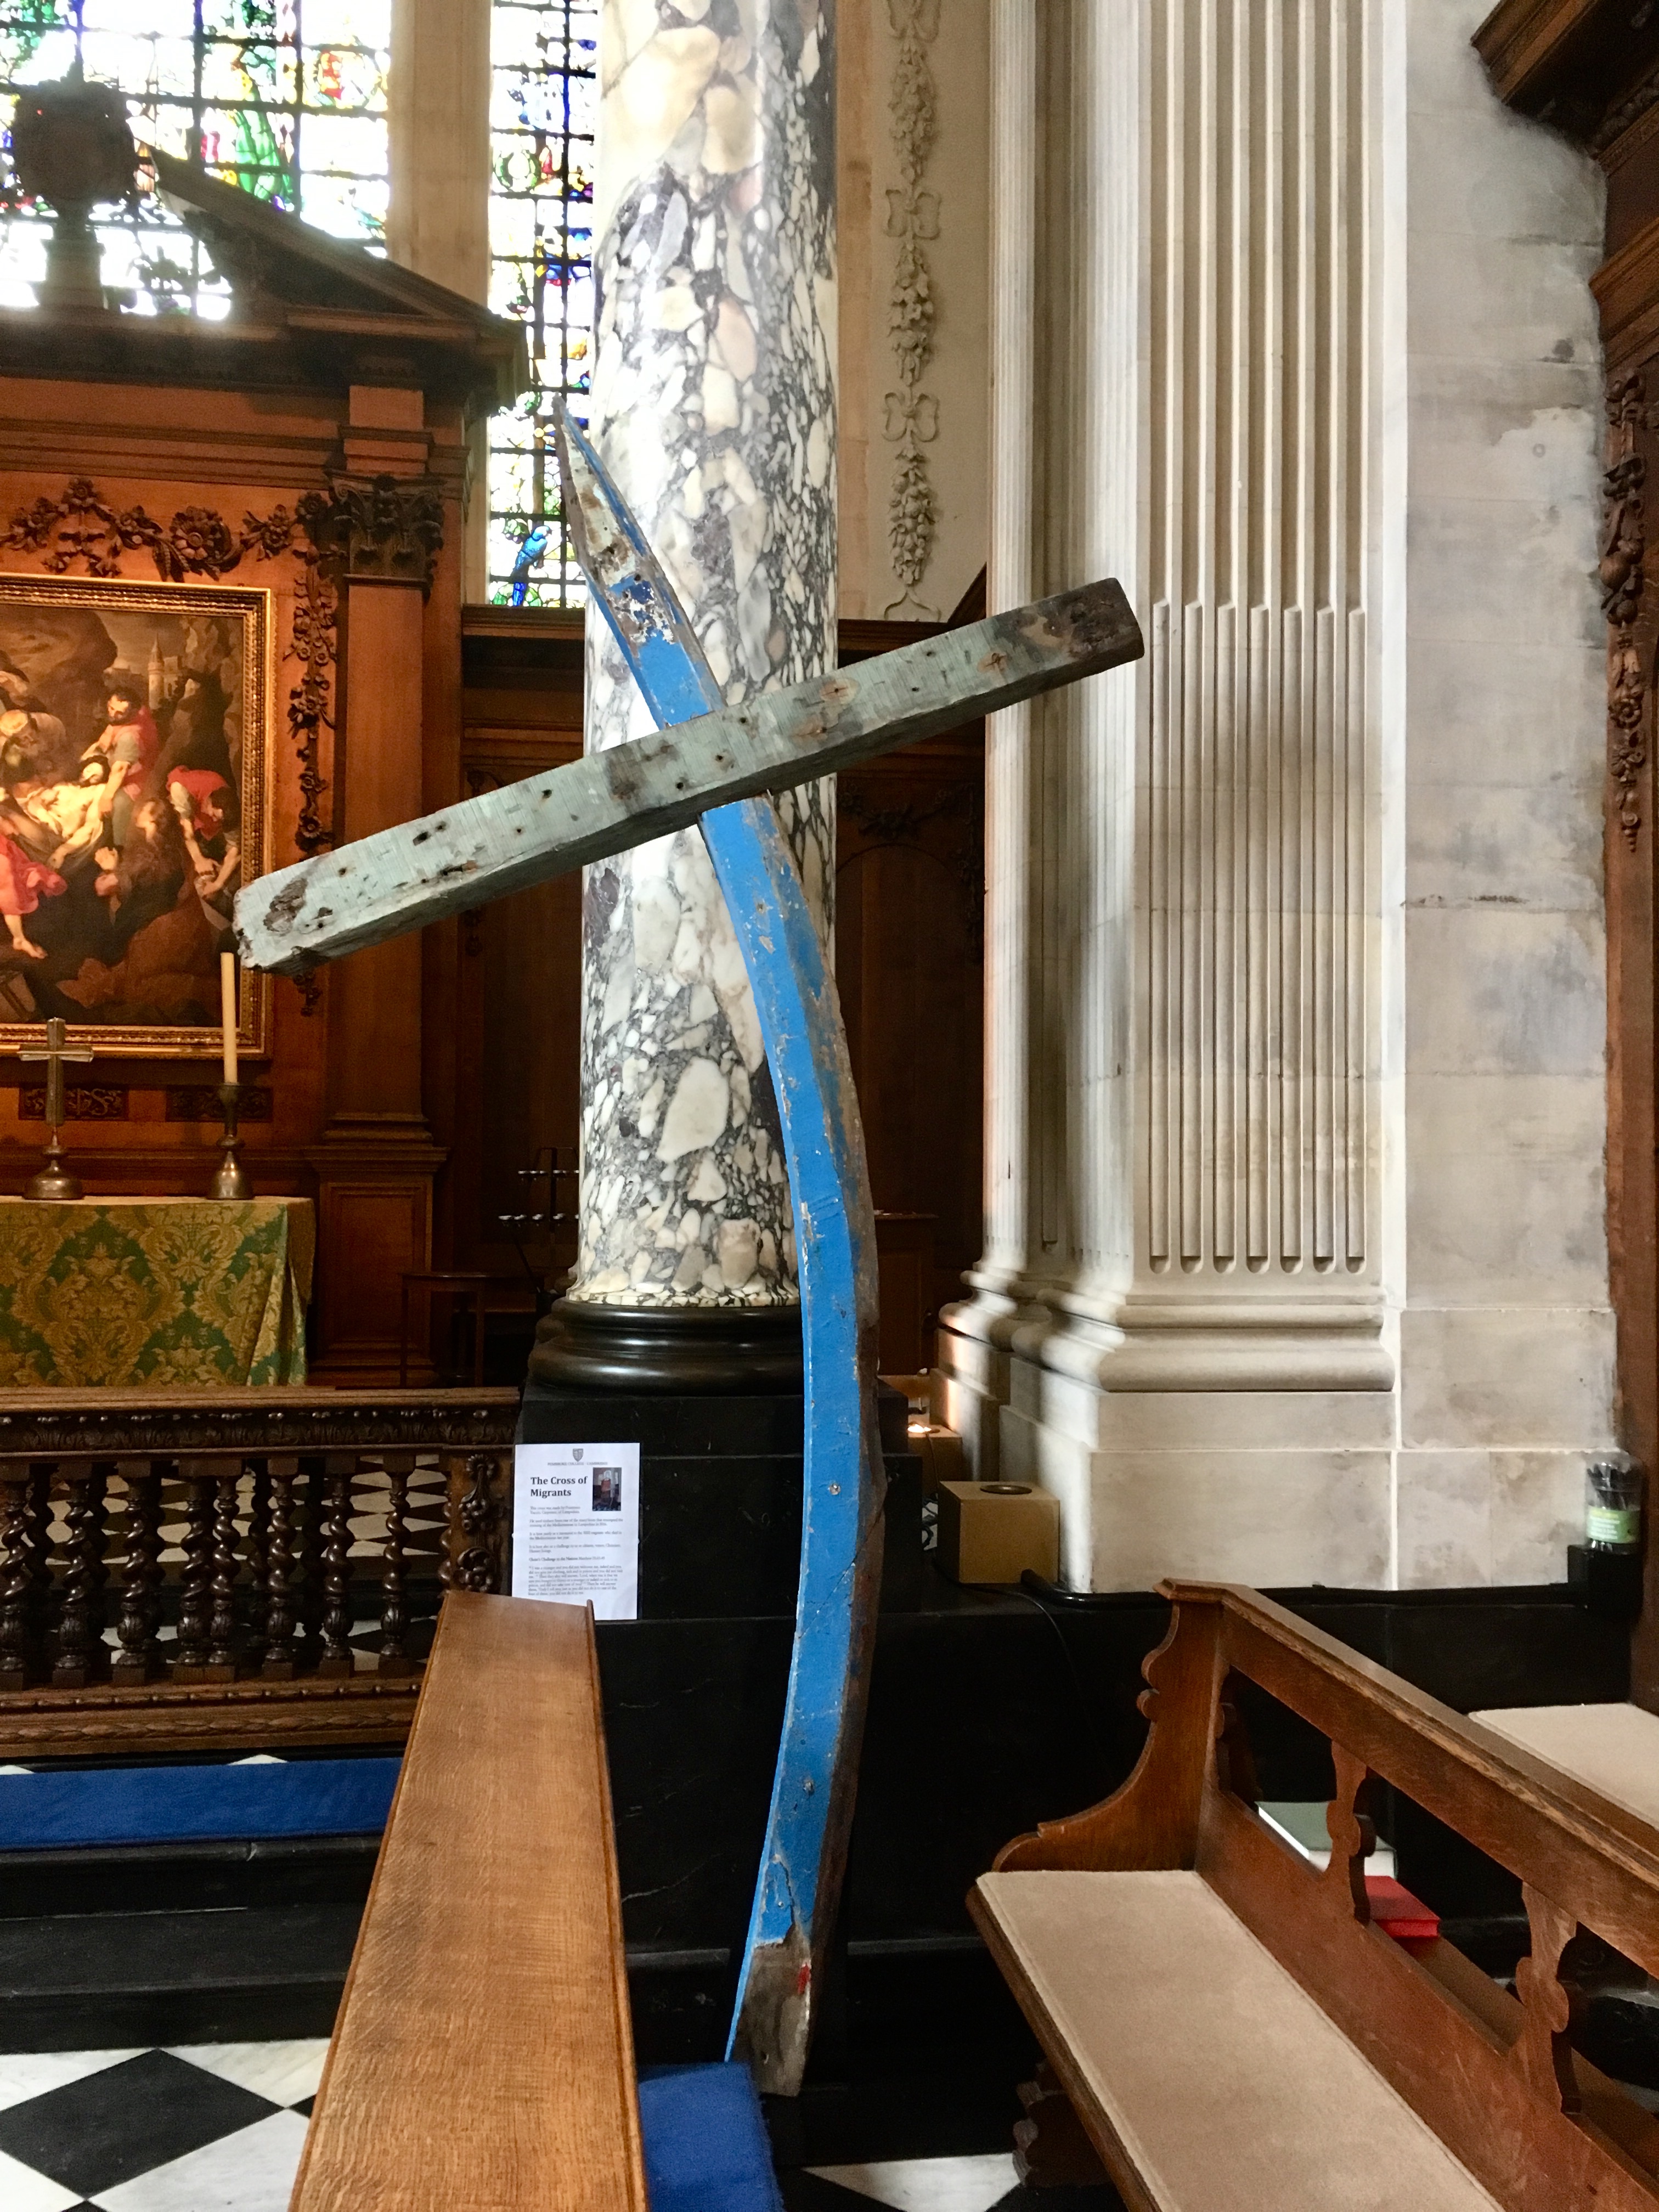 The Cross of Migrants as seen in a Cambridge Church